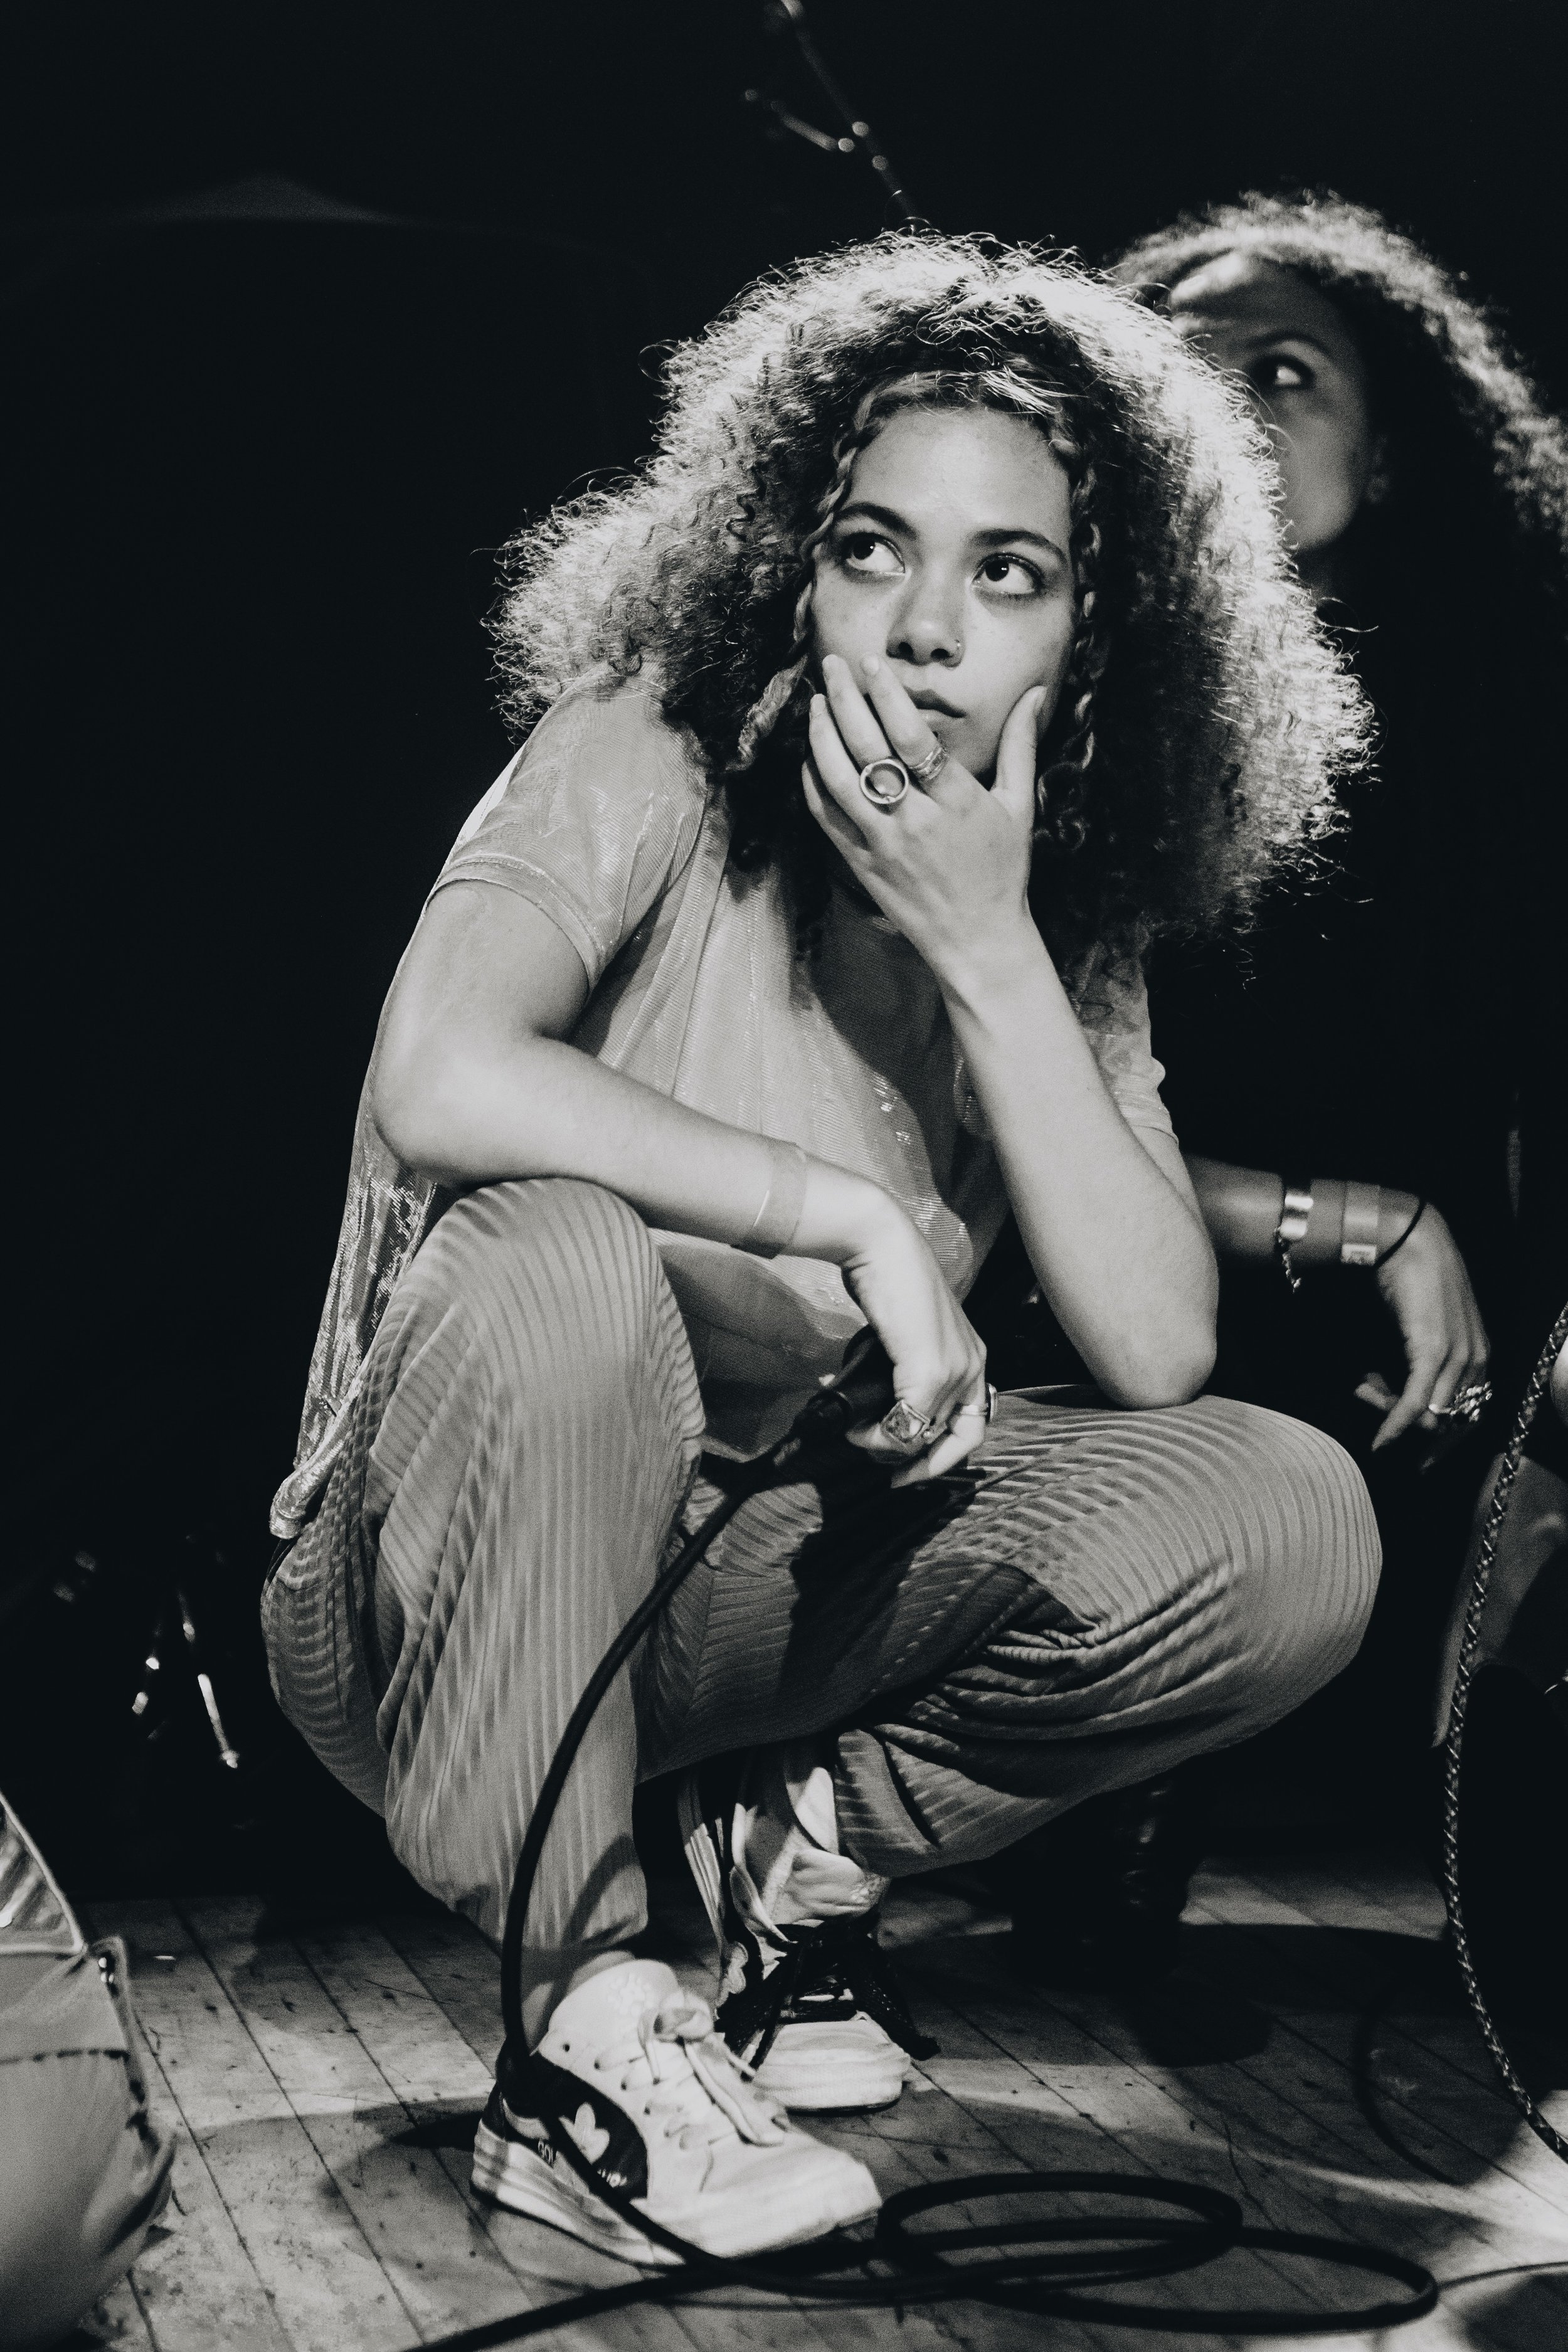 Isa, a female singer in her very early 20s, is crouched into the frame of this black and white photograph. As she is onstage, one hand rests on her knee and grasps a microphone. Her other hand, adorned with several rings, is held up to her chin signifying a moment of contemplation. Sections of her curly hair are braided and cascade down the sides of her face. The rest of her hair is illuminated by the stage lighting and creates an angelic glow.